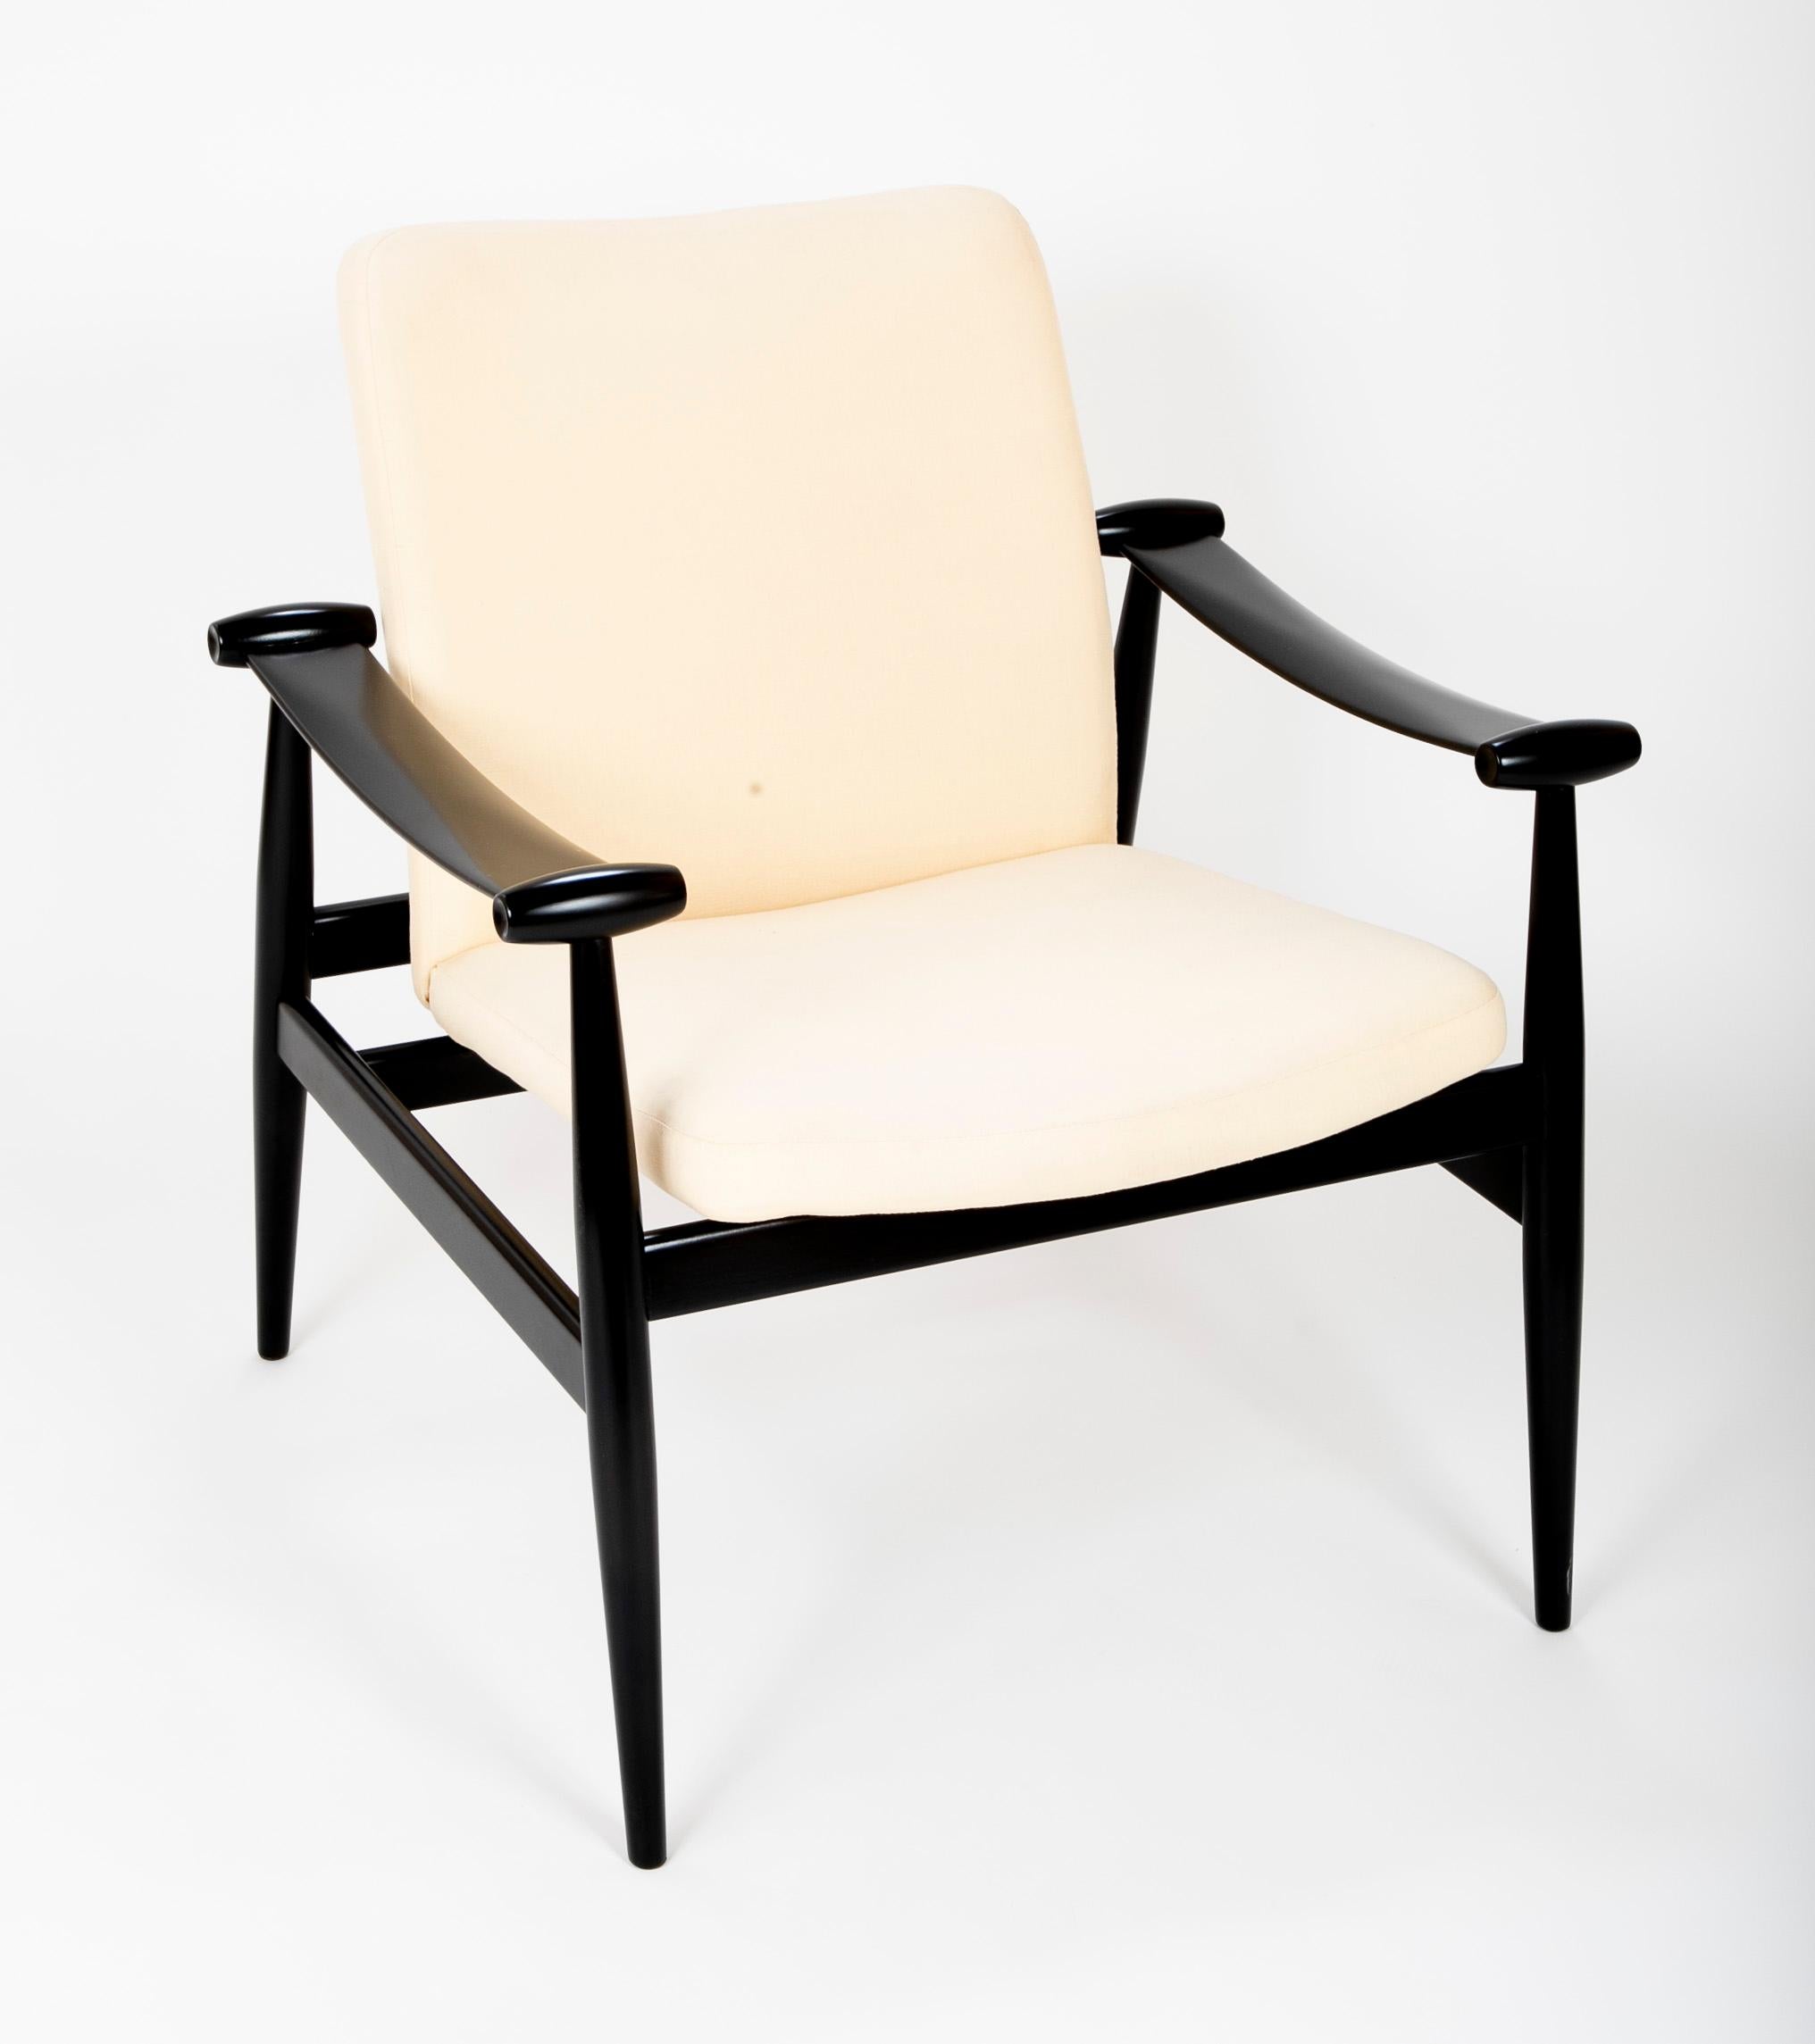 A France and Sons chair designed by Finn Juhl. Known as the 